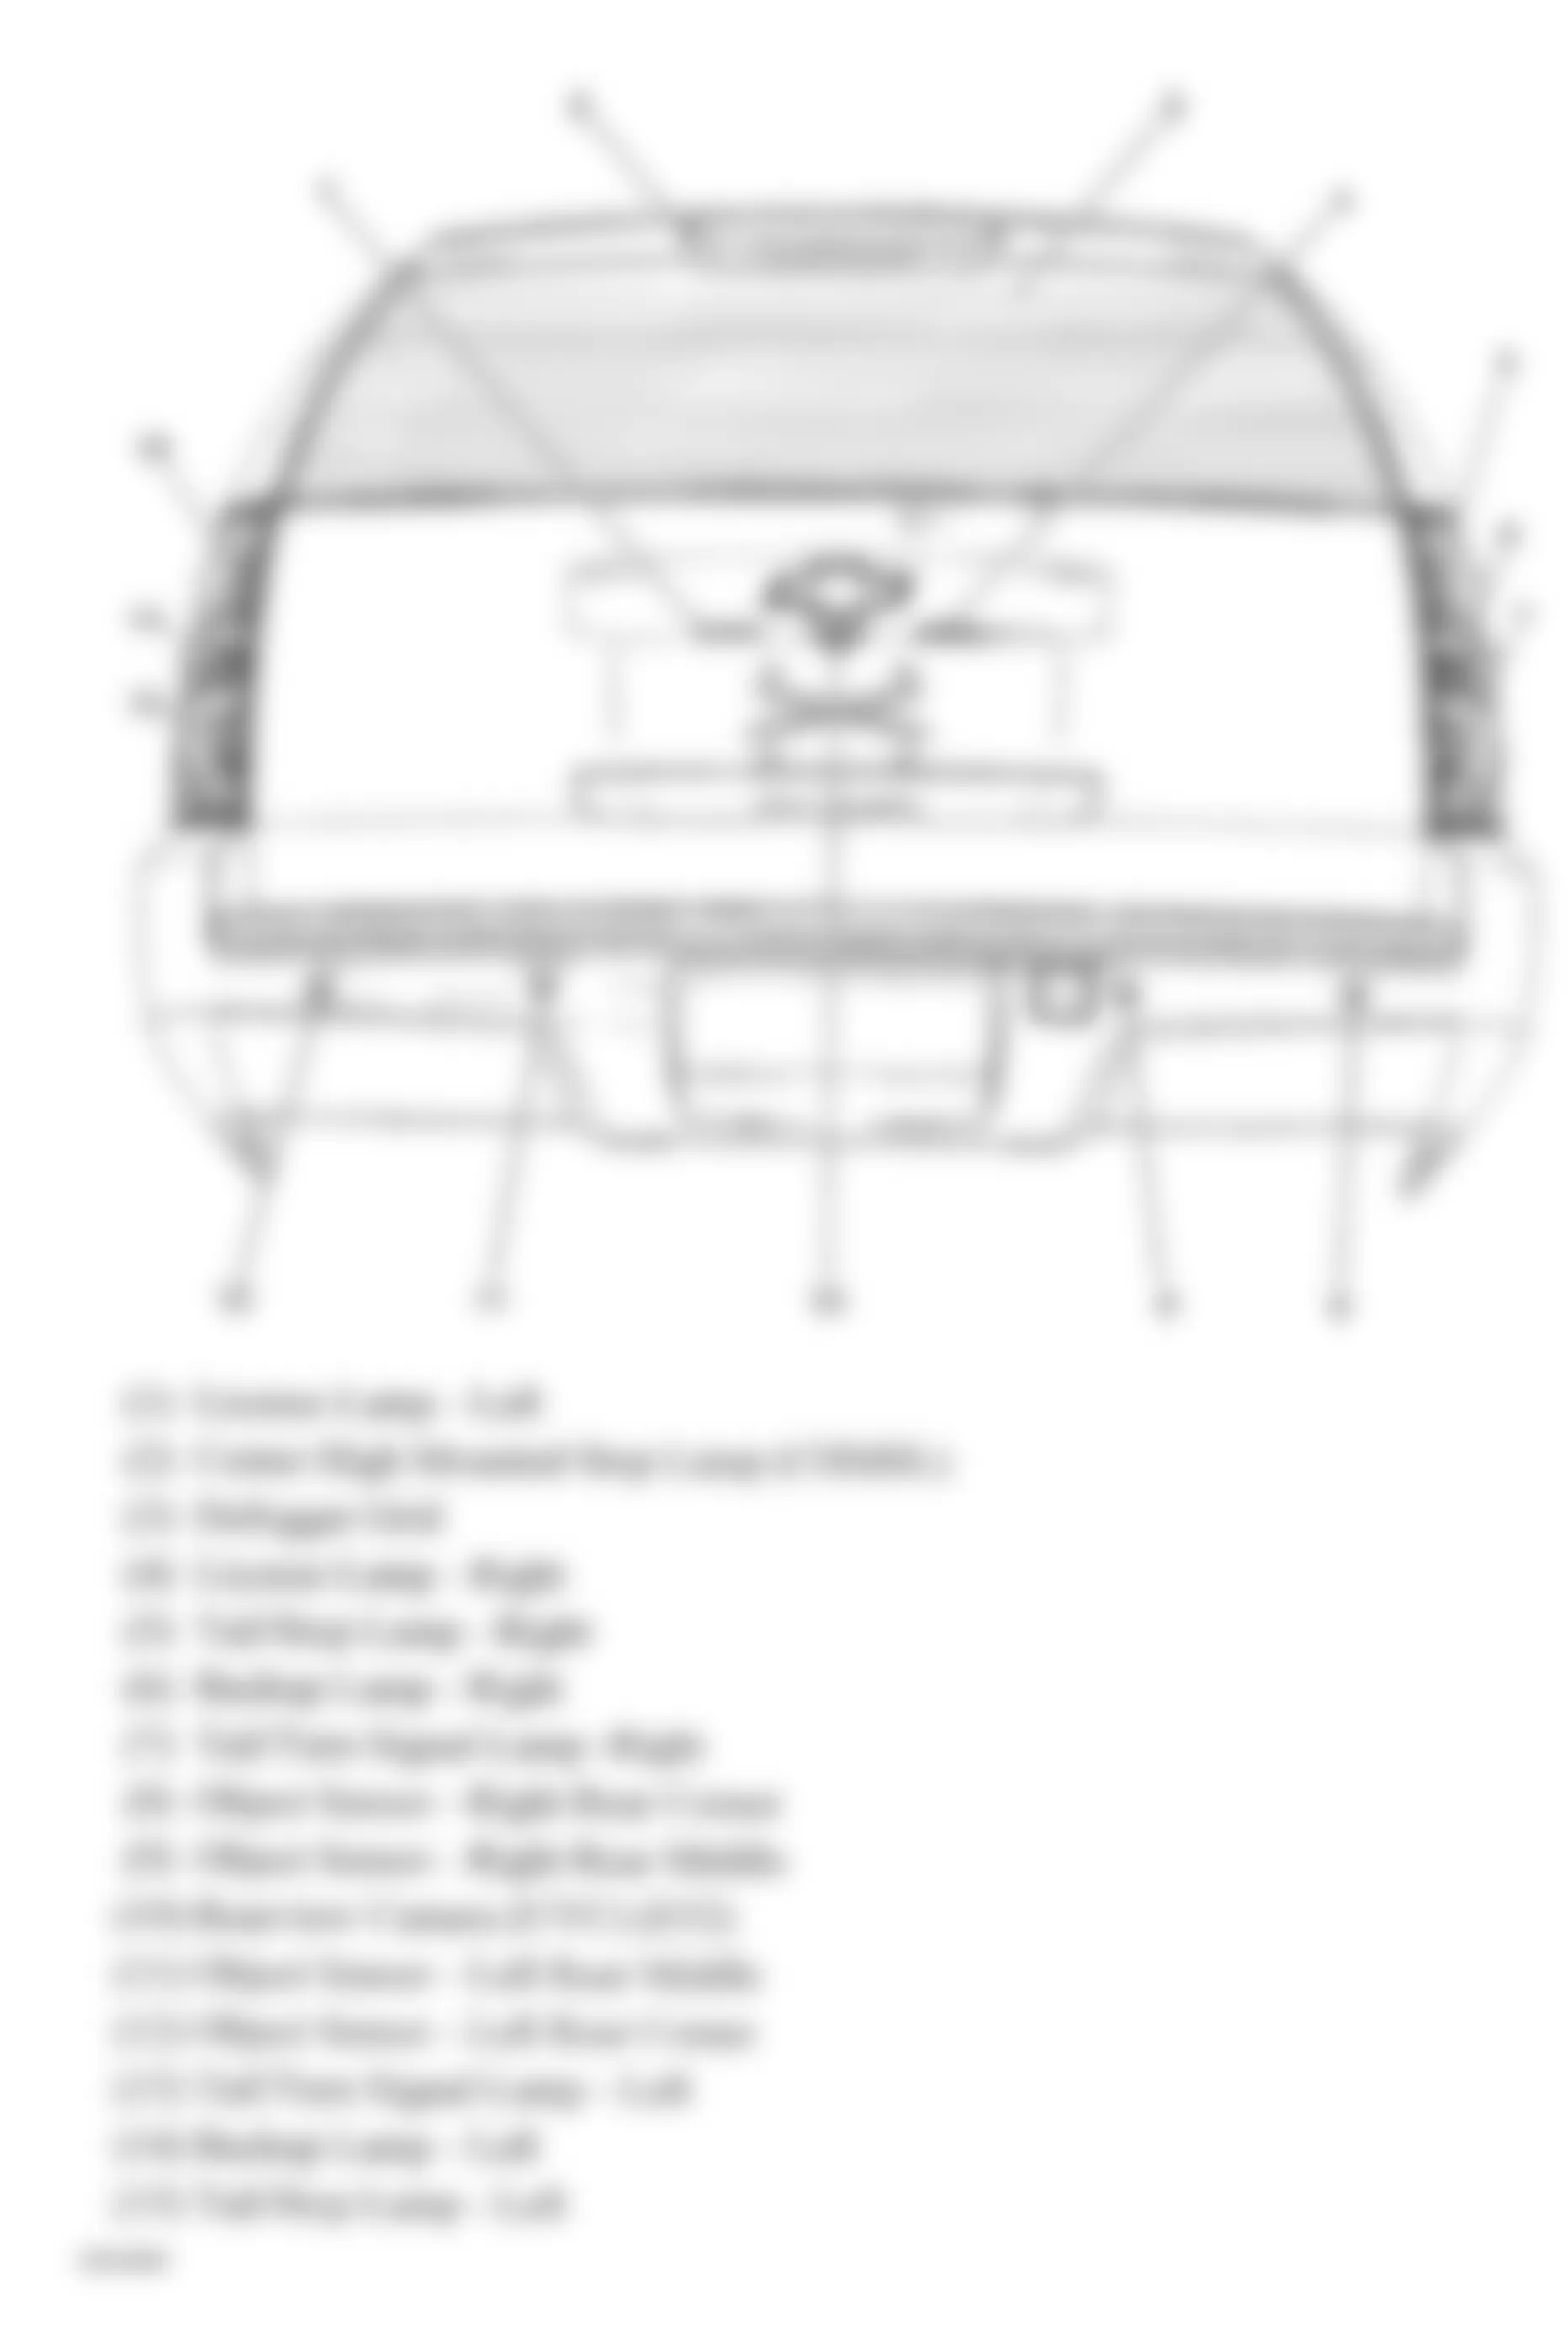 GMC Yukon XL C1500 2007 - Component Locations -  Rear Of Vehicle (Avalanche, Suburban & Tahoe W/One Piece Liftgate)